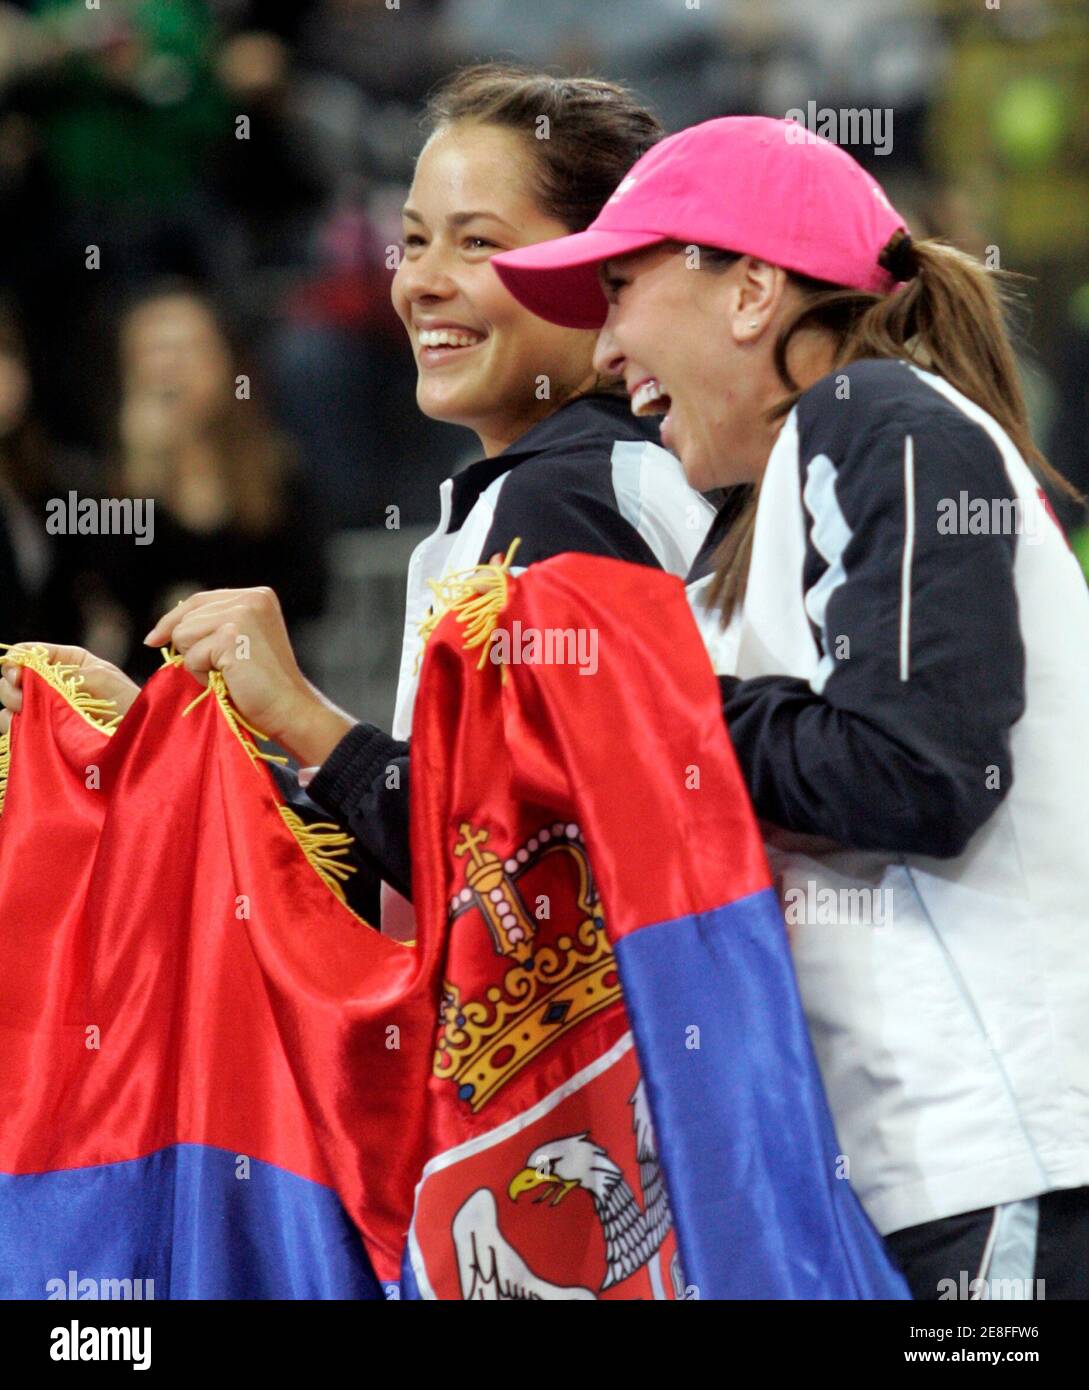 Serbia's Ana Ivanovic (L) and Jelena Jankovic pose with a Serbian flag after their victory against Japan at the Fed Cup World Group II, first round tennis tournament in Belgrade February 8, 2009.  REUTERS/Ivan Milutinovic   (SERBIA) Stock Photo